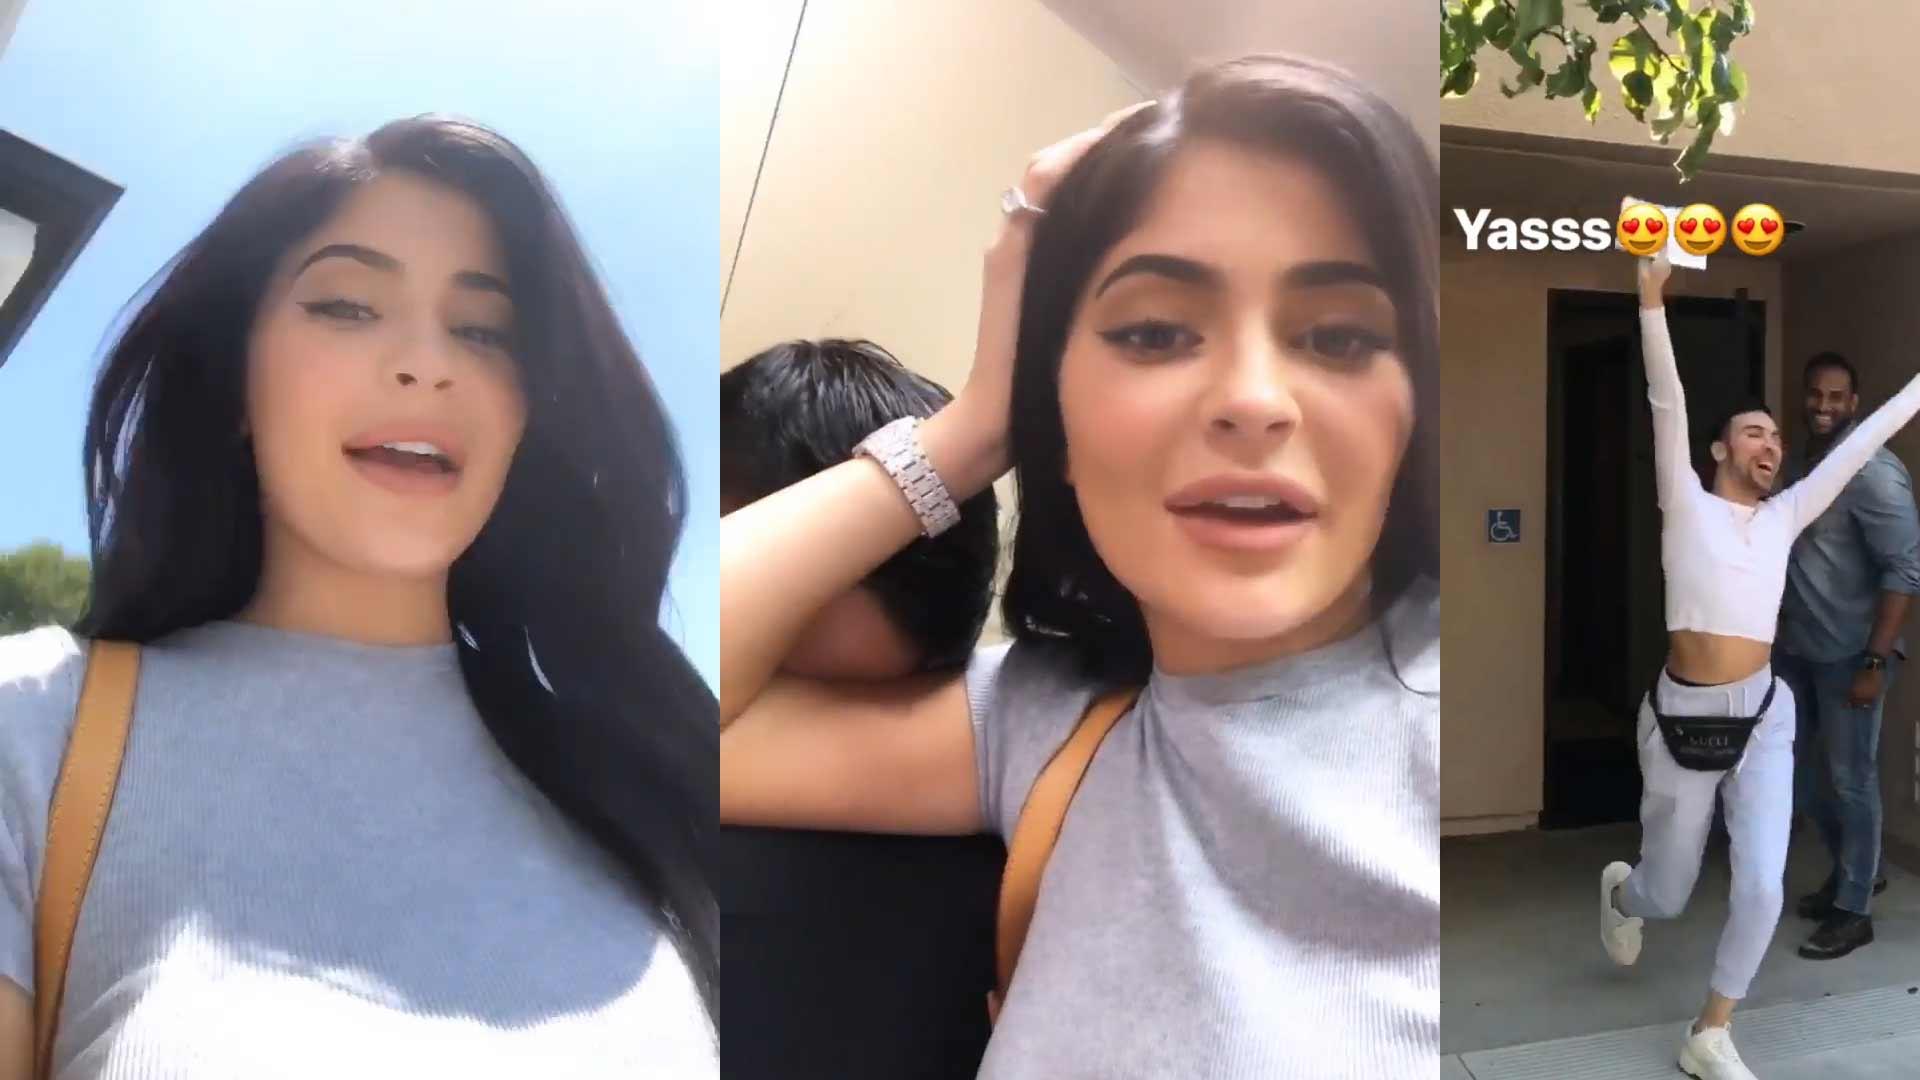 Billionaire Kylie Jenner Voluntarily Spends Day at DMV With Makeup Artist For Driver’s Test